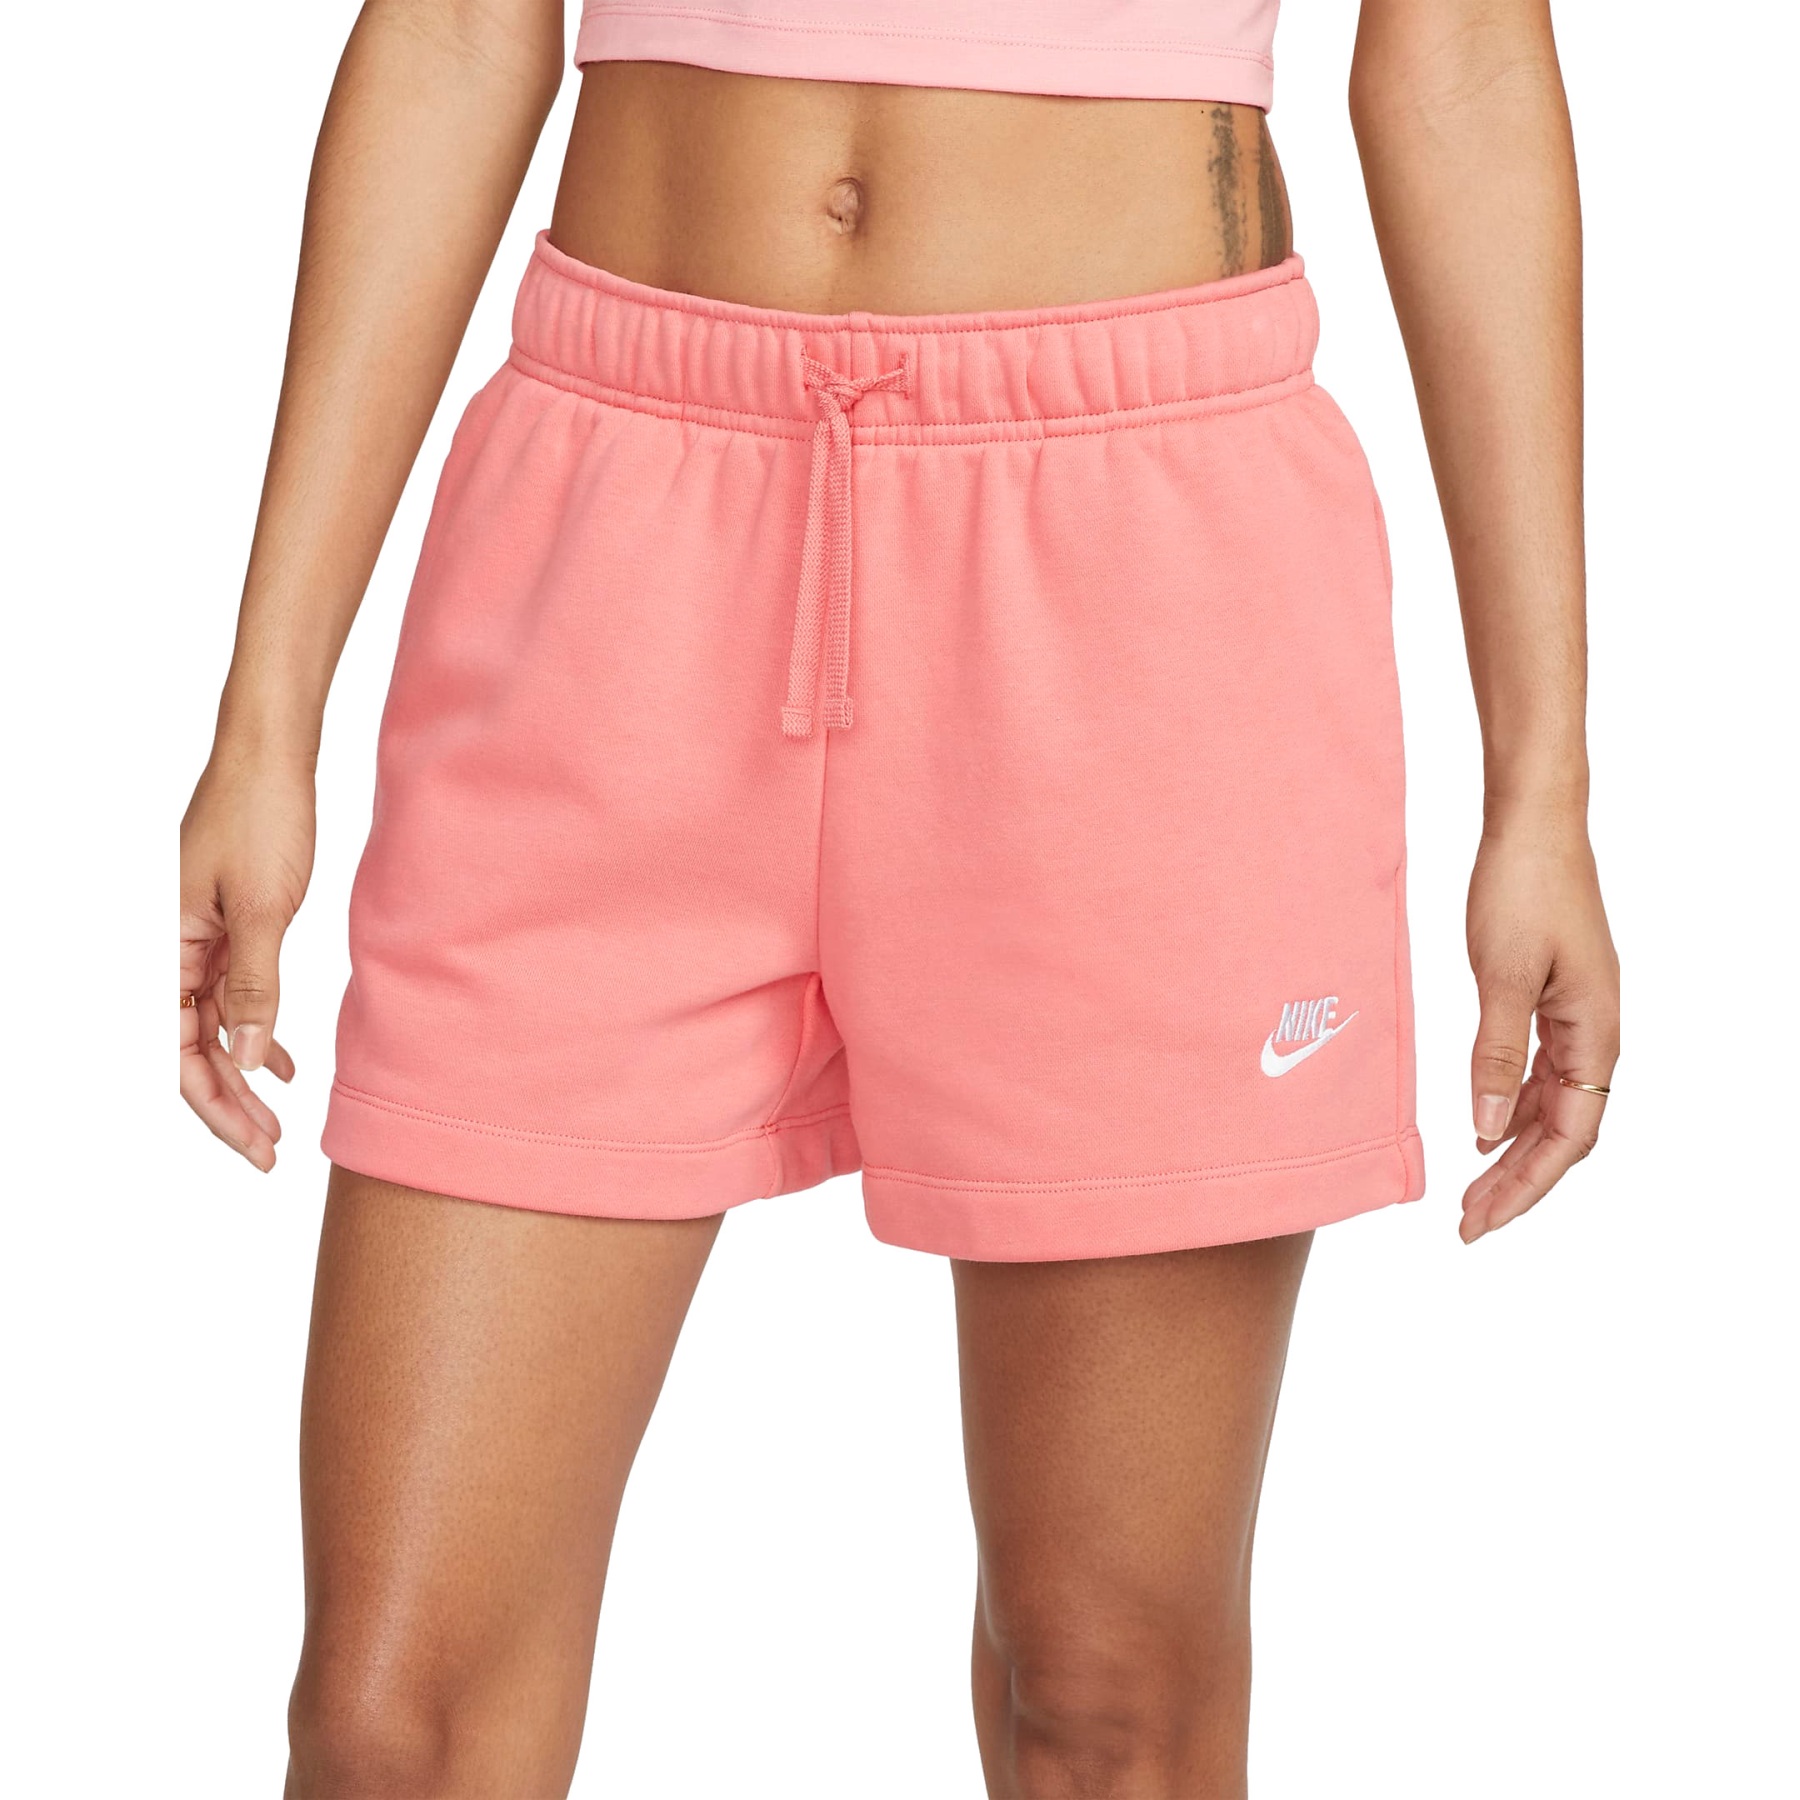 Picture of Nike Sportswear Club Fleece Mid-Rise Shorts Women - sea coral/white DQ5802-894